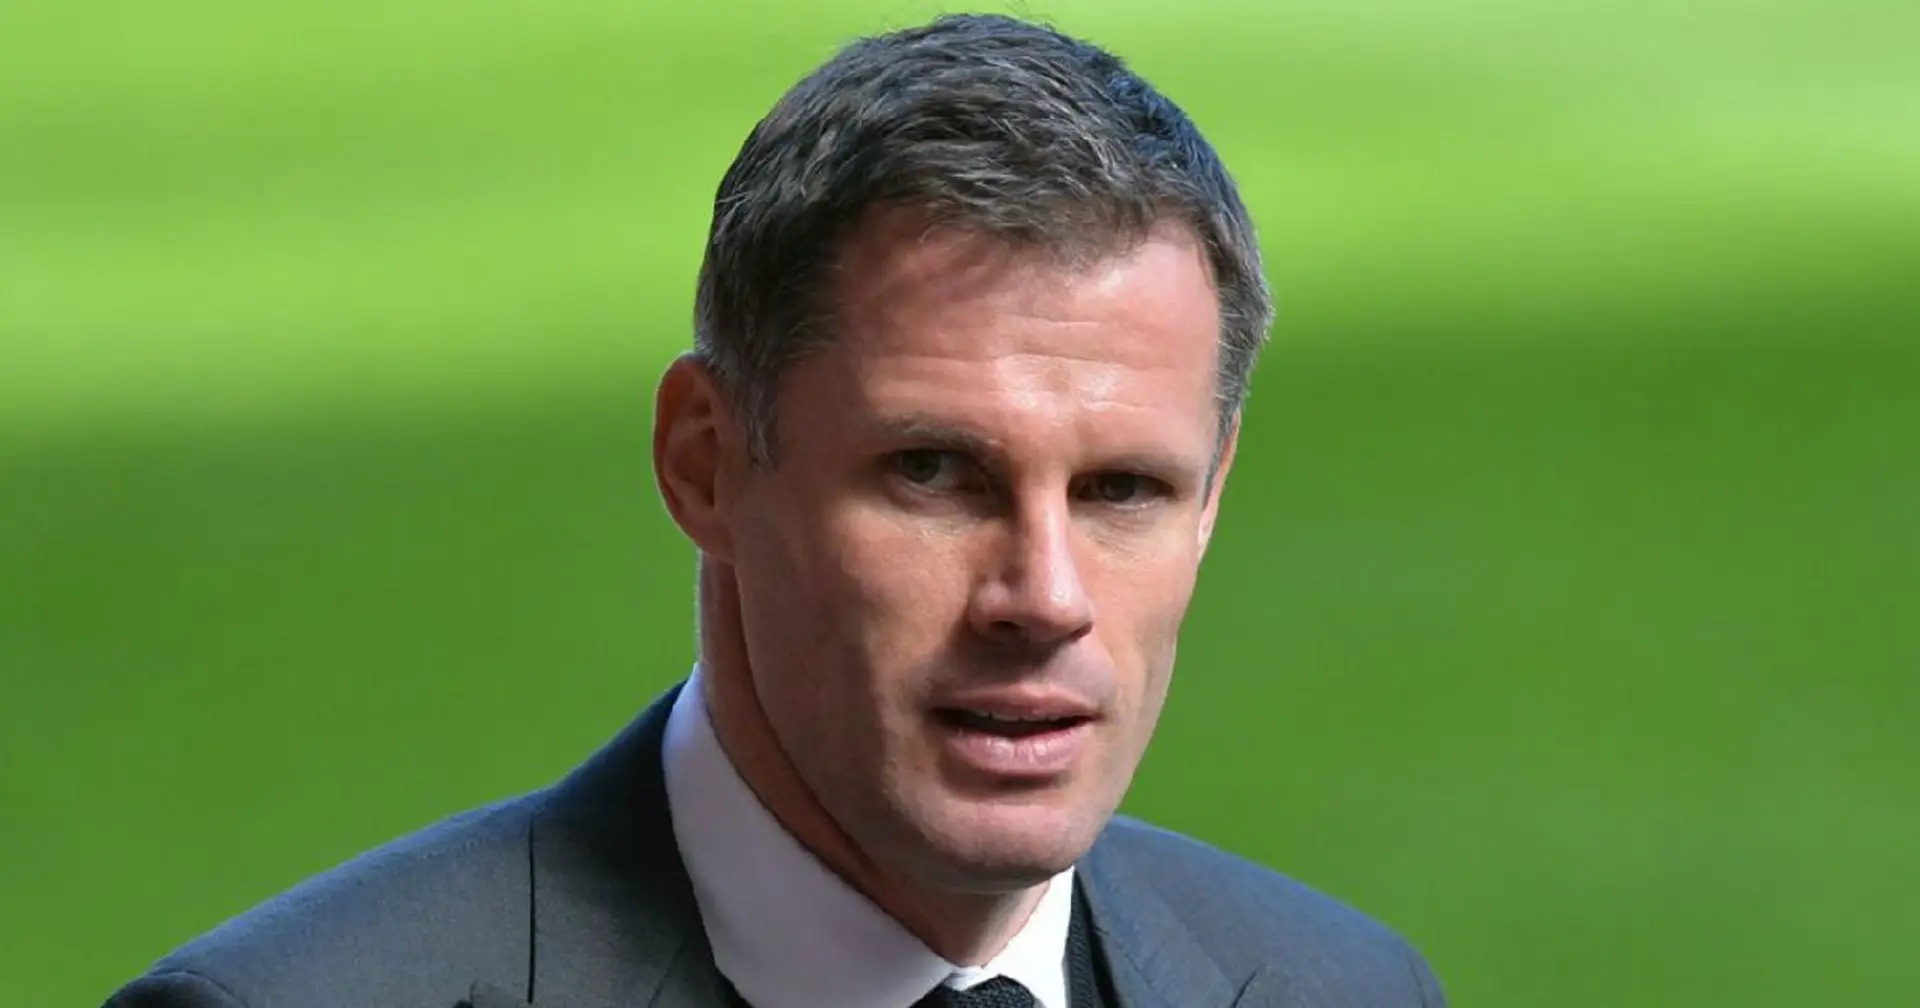 'Delete this tweet you f****** idiot': Carragher slams Lord Sugar for distasteful tweet about Gerard Houllier